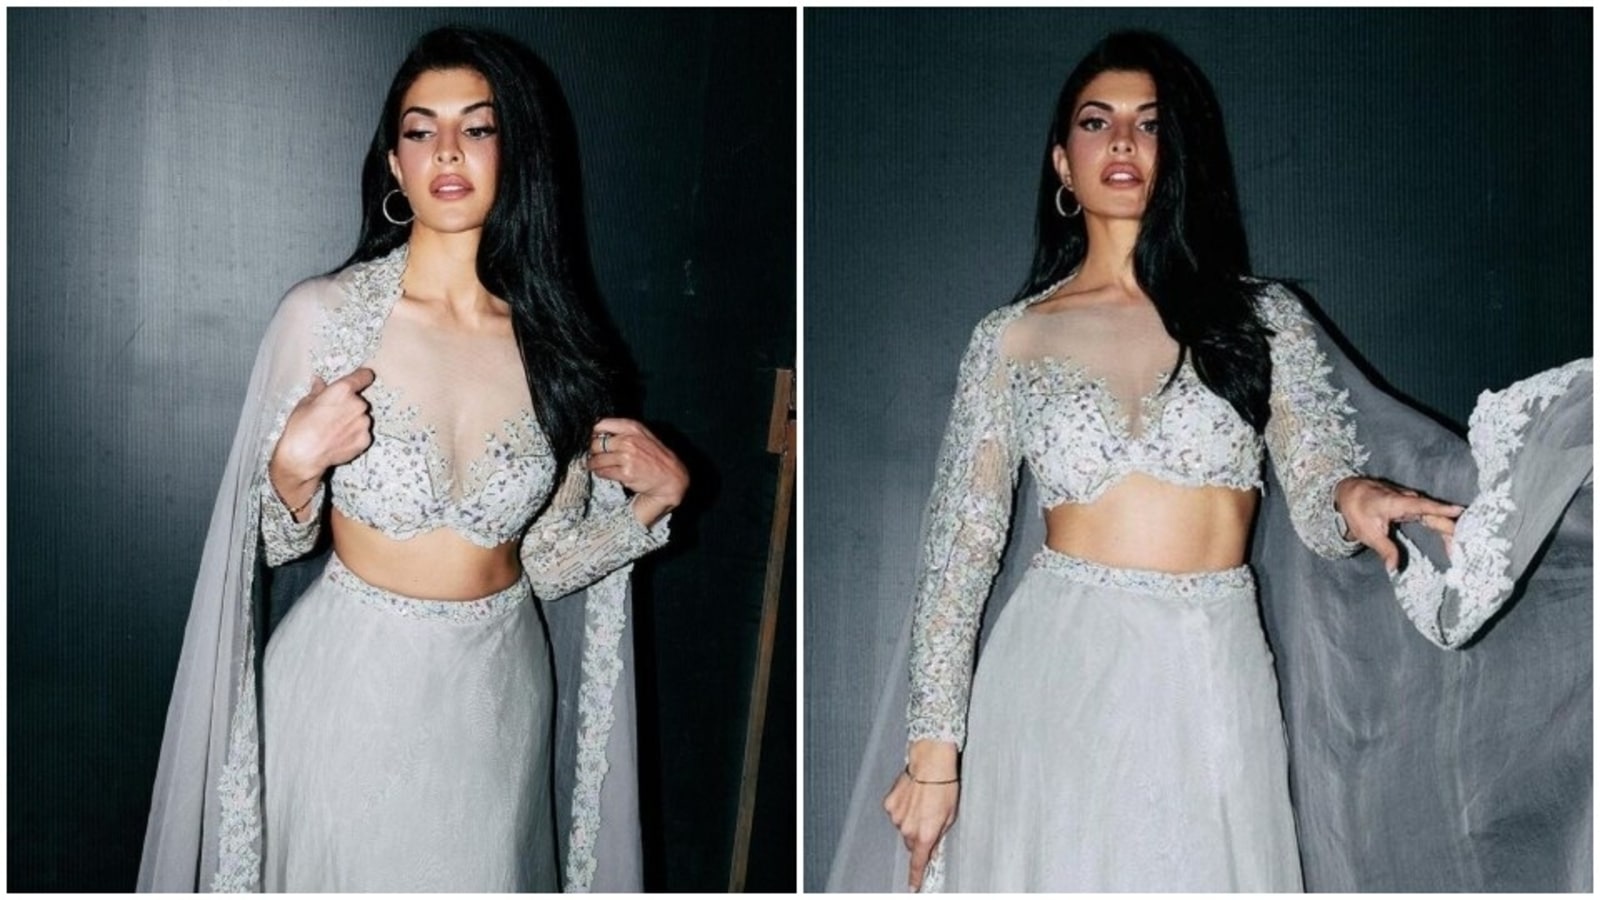 Jacqueline Nude Photos - Jacqueline Fernandez's pearl-grey lehenga and stylish blouse is for the  modern bride to rock at winter wedding: All pics | Fashion Trends -  Hindustan Times